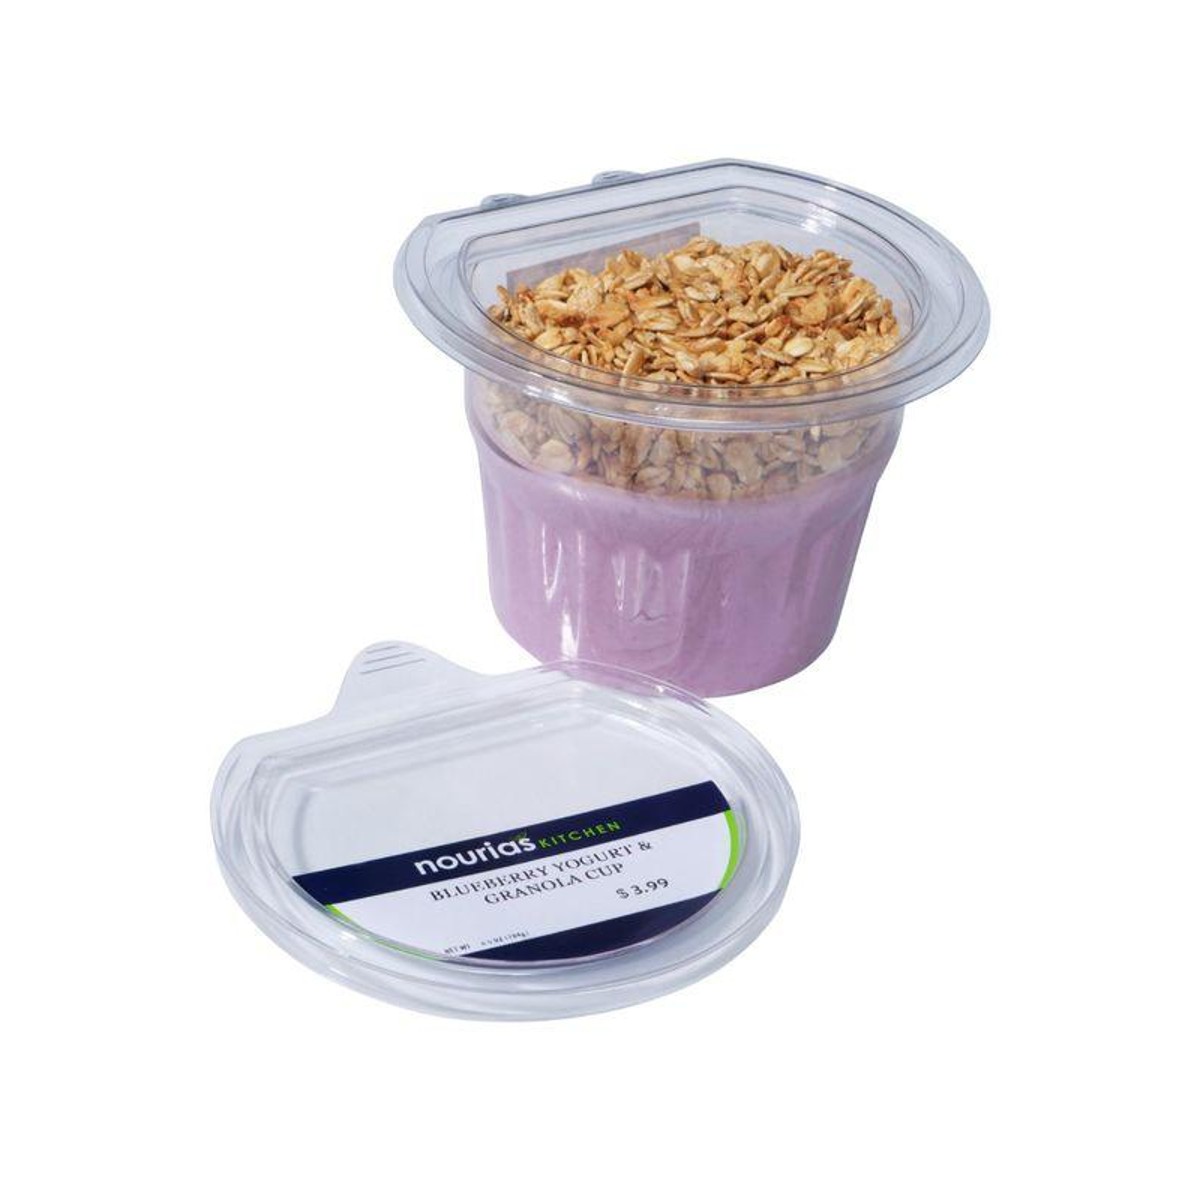 4 Reusable Snack Containers with Lids, 4.75oz Small Cups - Microwave +